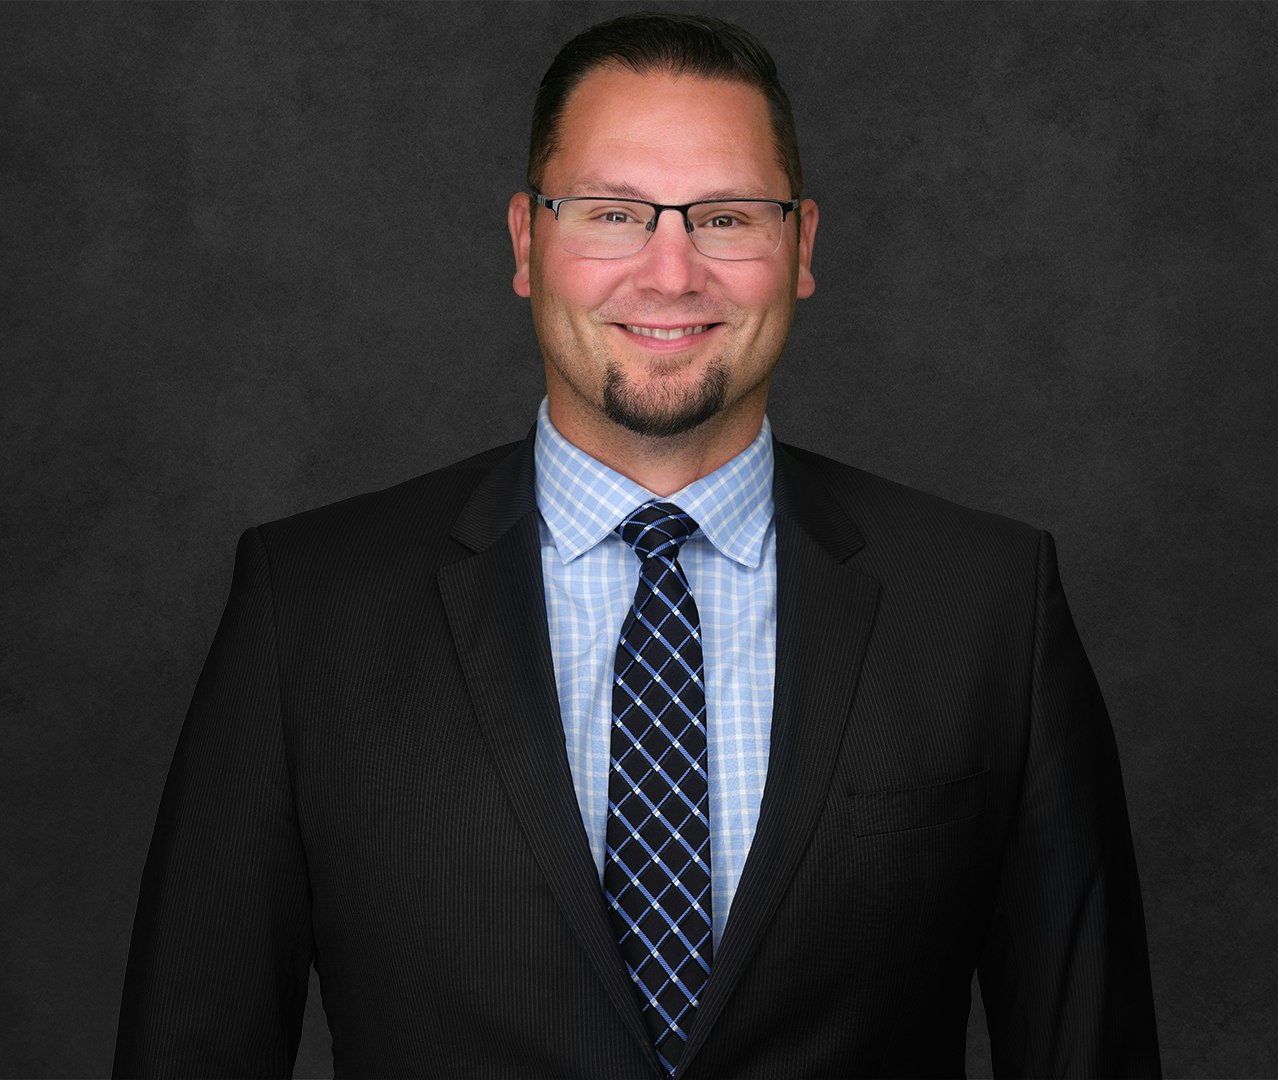 Mark Szott wearing glasses, a suit and tie, and smiling